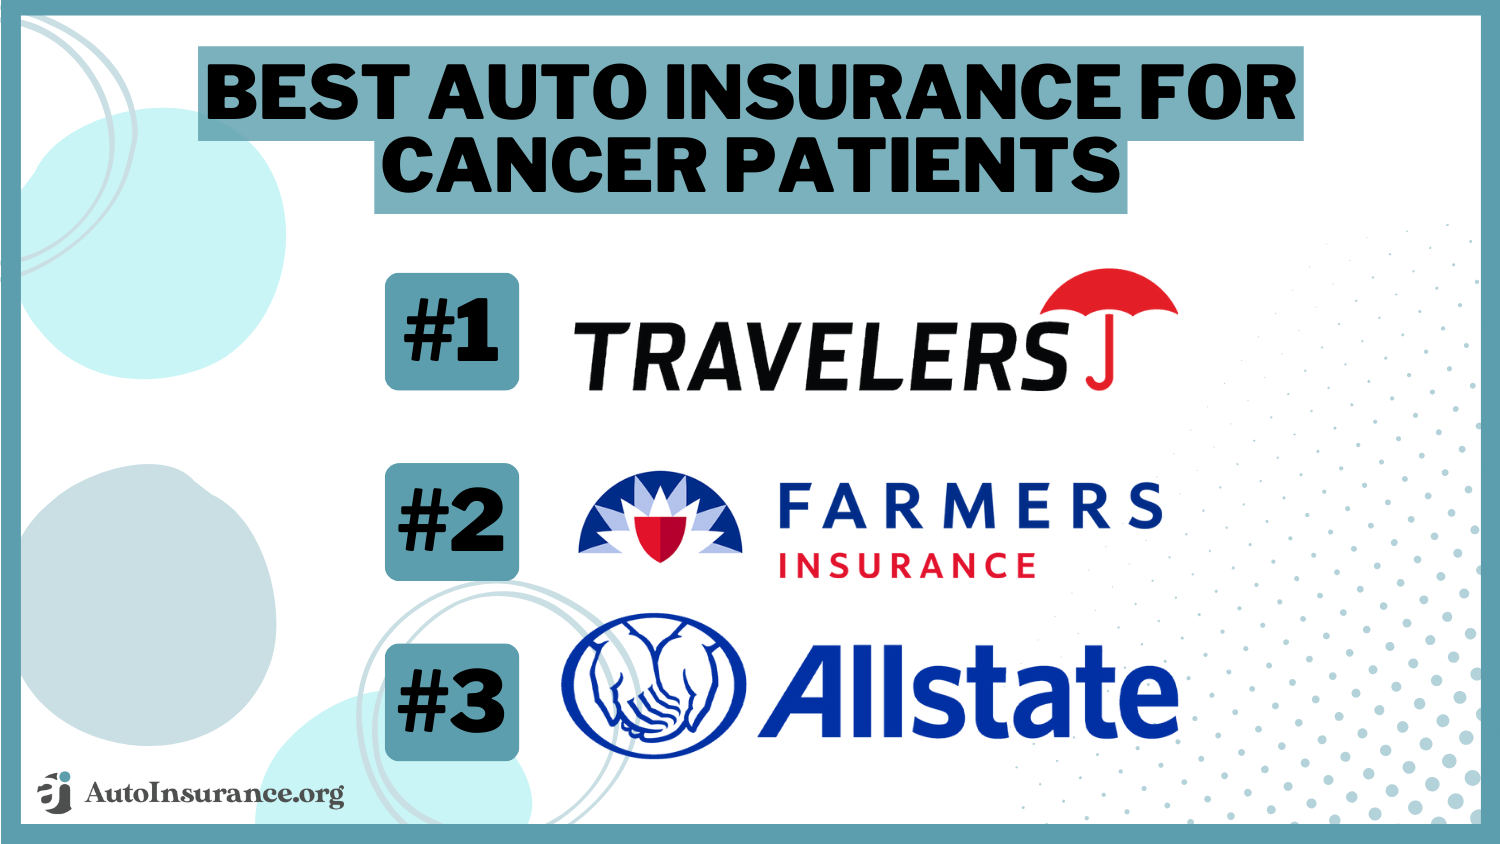 Best Auto Insurance for Cancer Patients: Travelers, Farmers, and Allstate